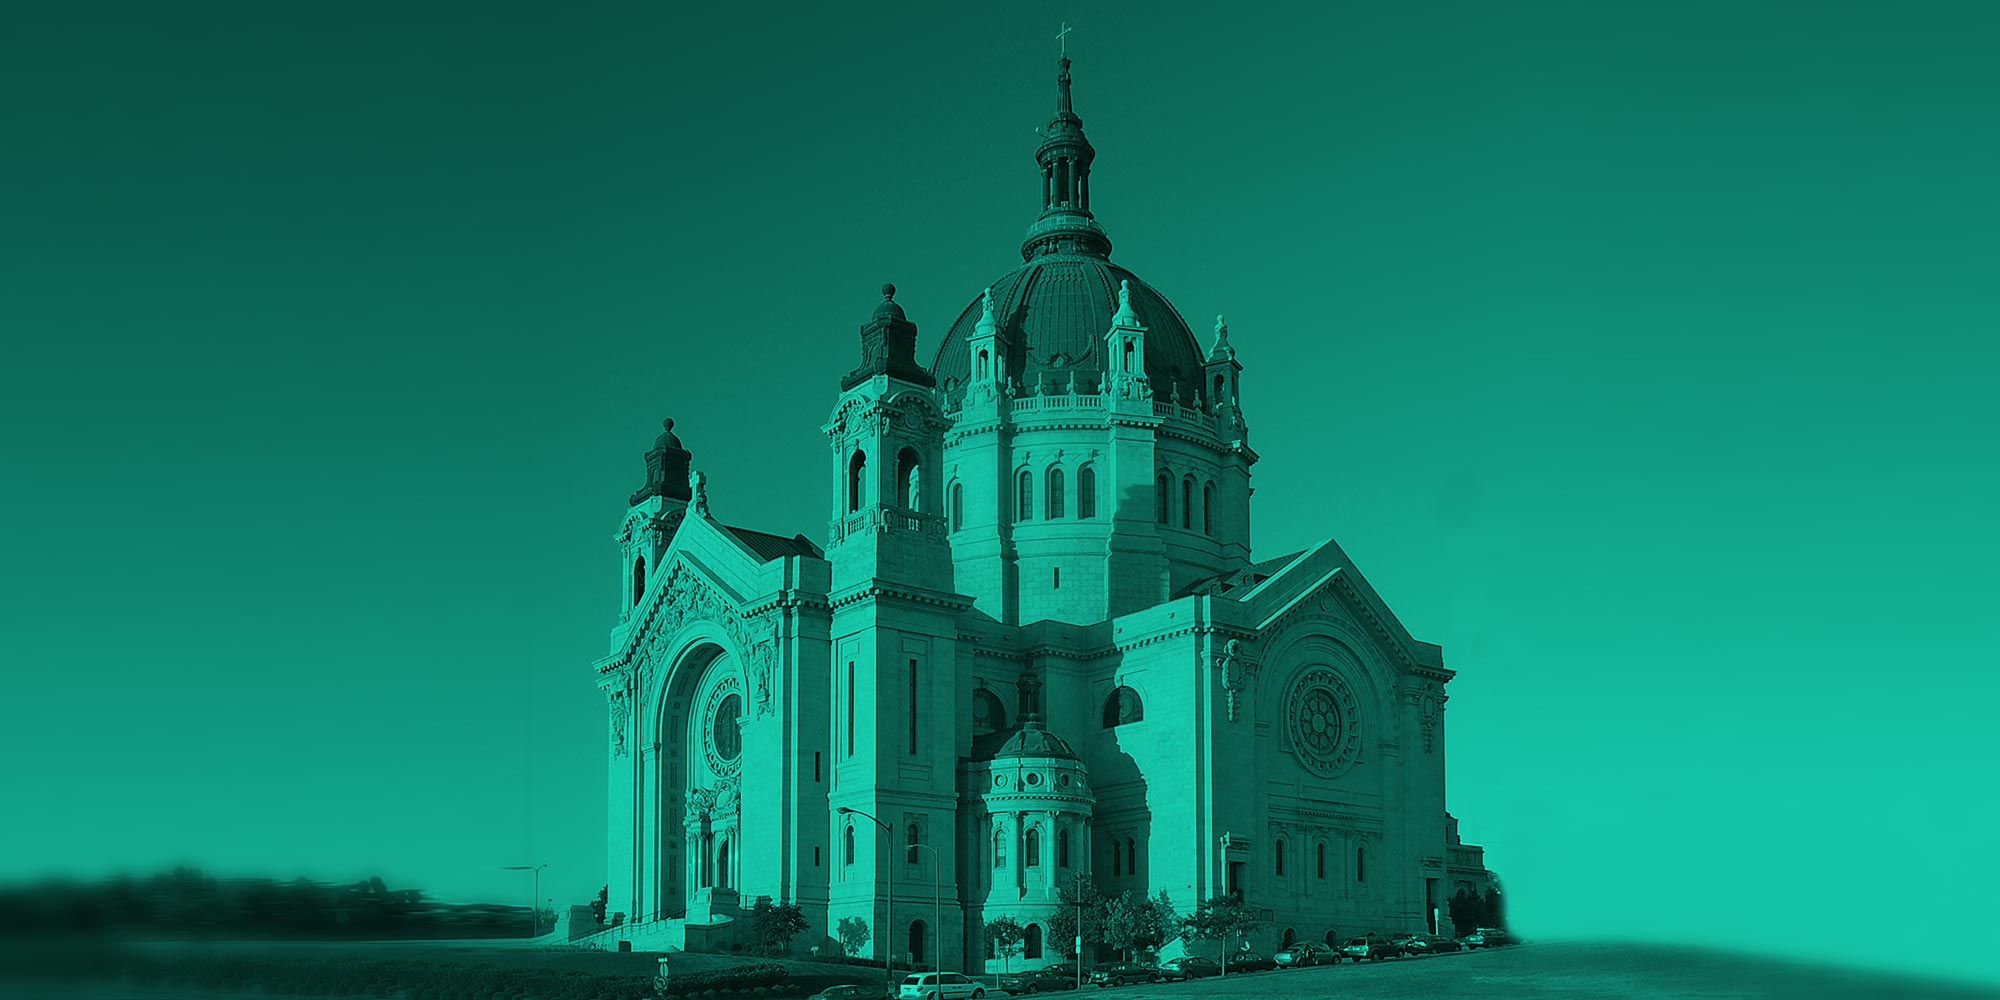 The Cathedral of St. Paul in St. Paul, Minnesota. Suboxone treatment in St. Paul.